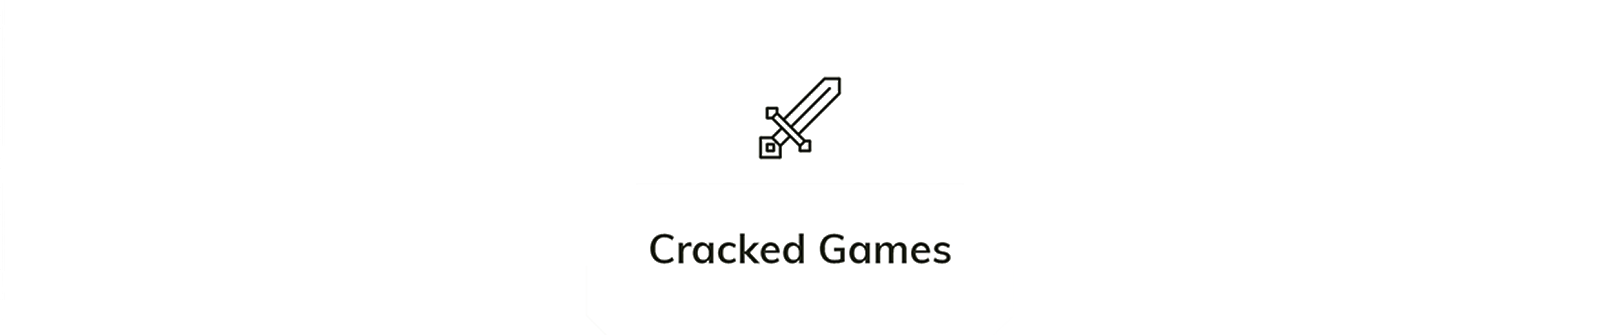 Cracked Games